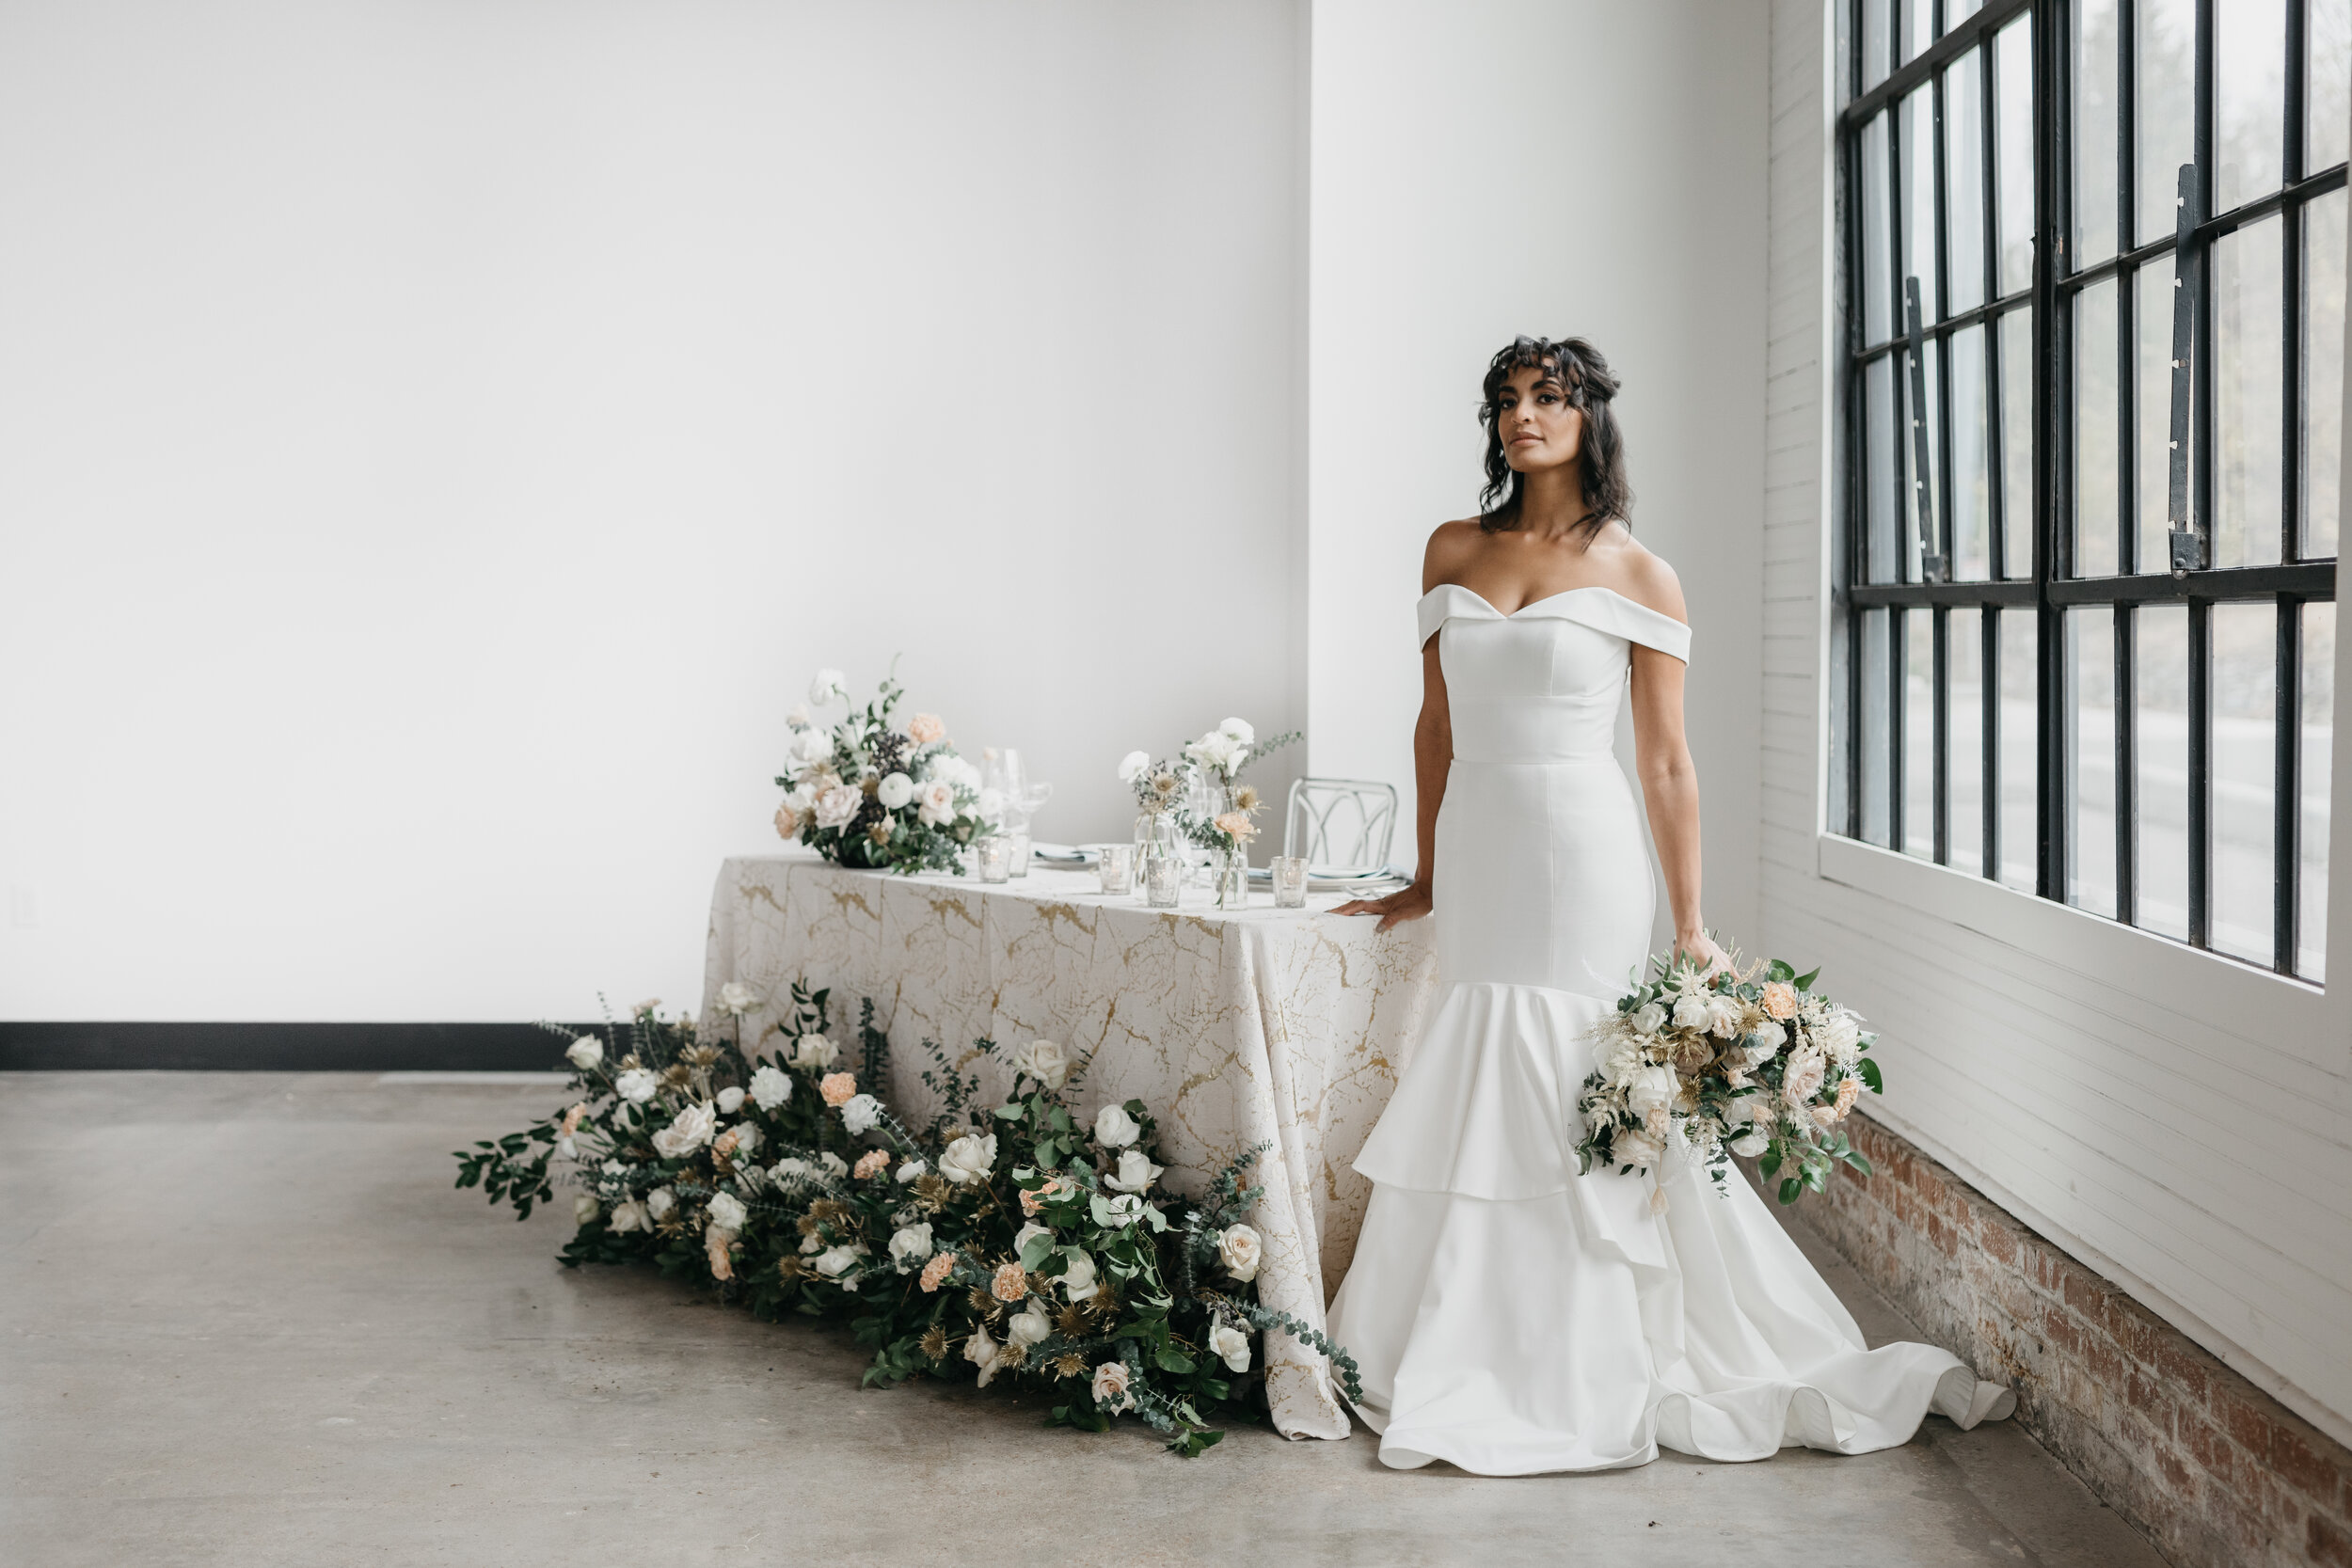 Wintery growing floor installation and tablescape featuring white and quicksand roses, touches of gold, baby eucalyptus and lush greenery. Nashville wedding florist Rosemary & Finch at OZARI.